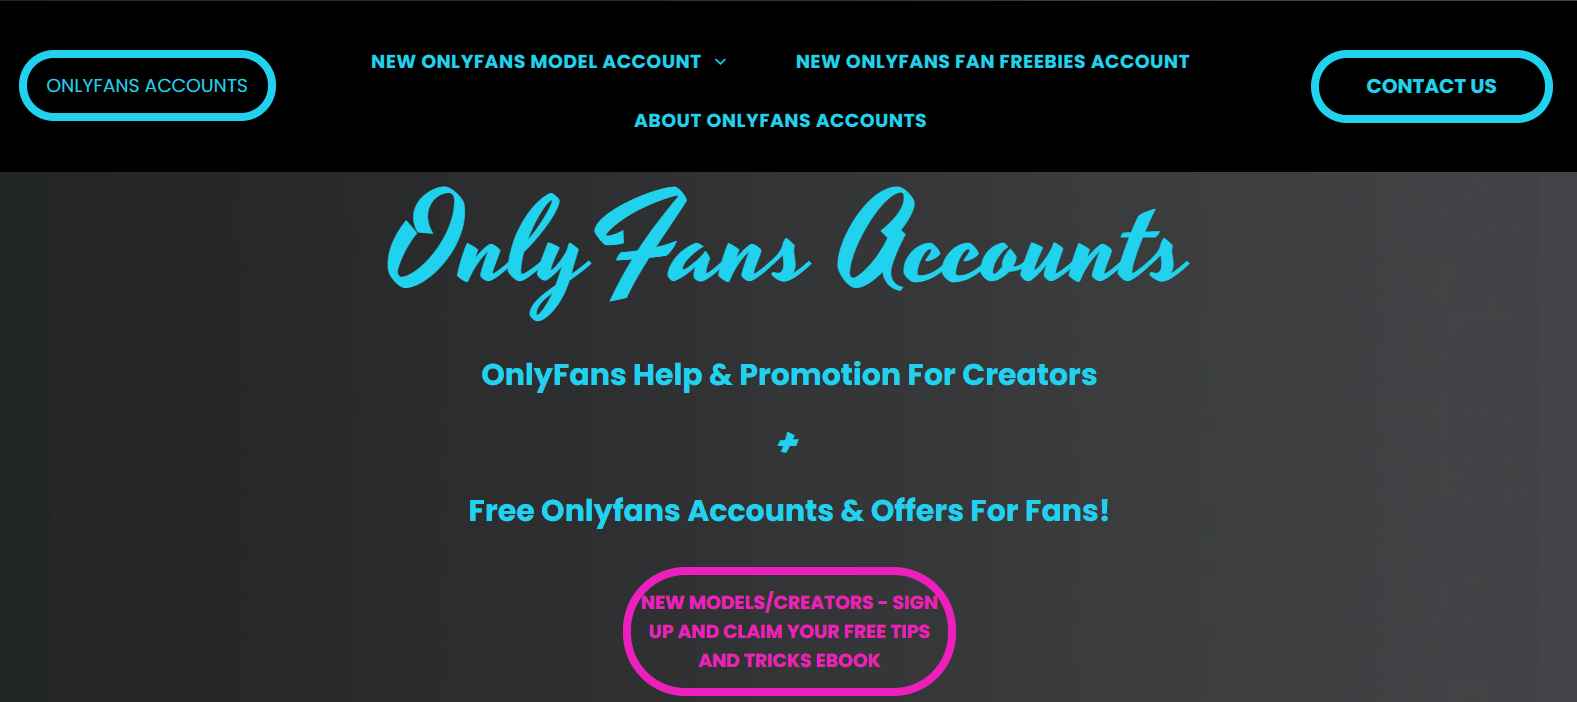 How to access an onlyfans account for free